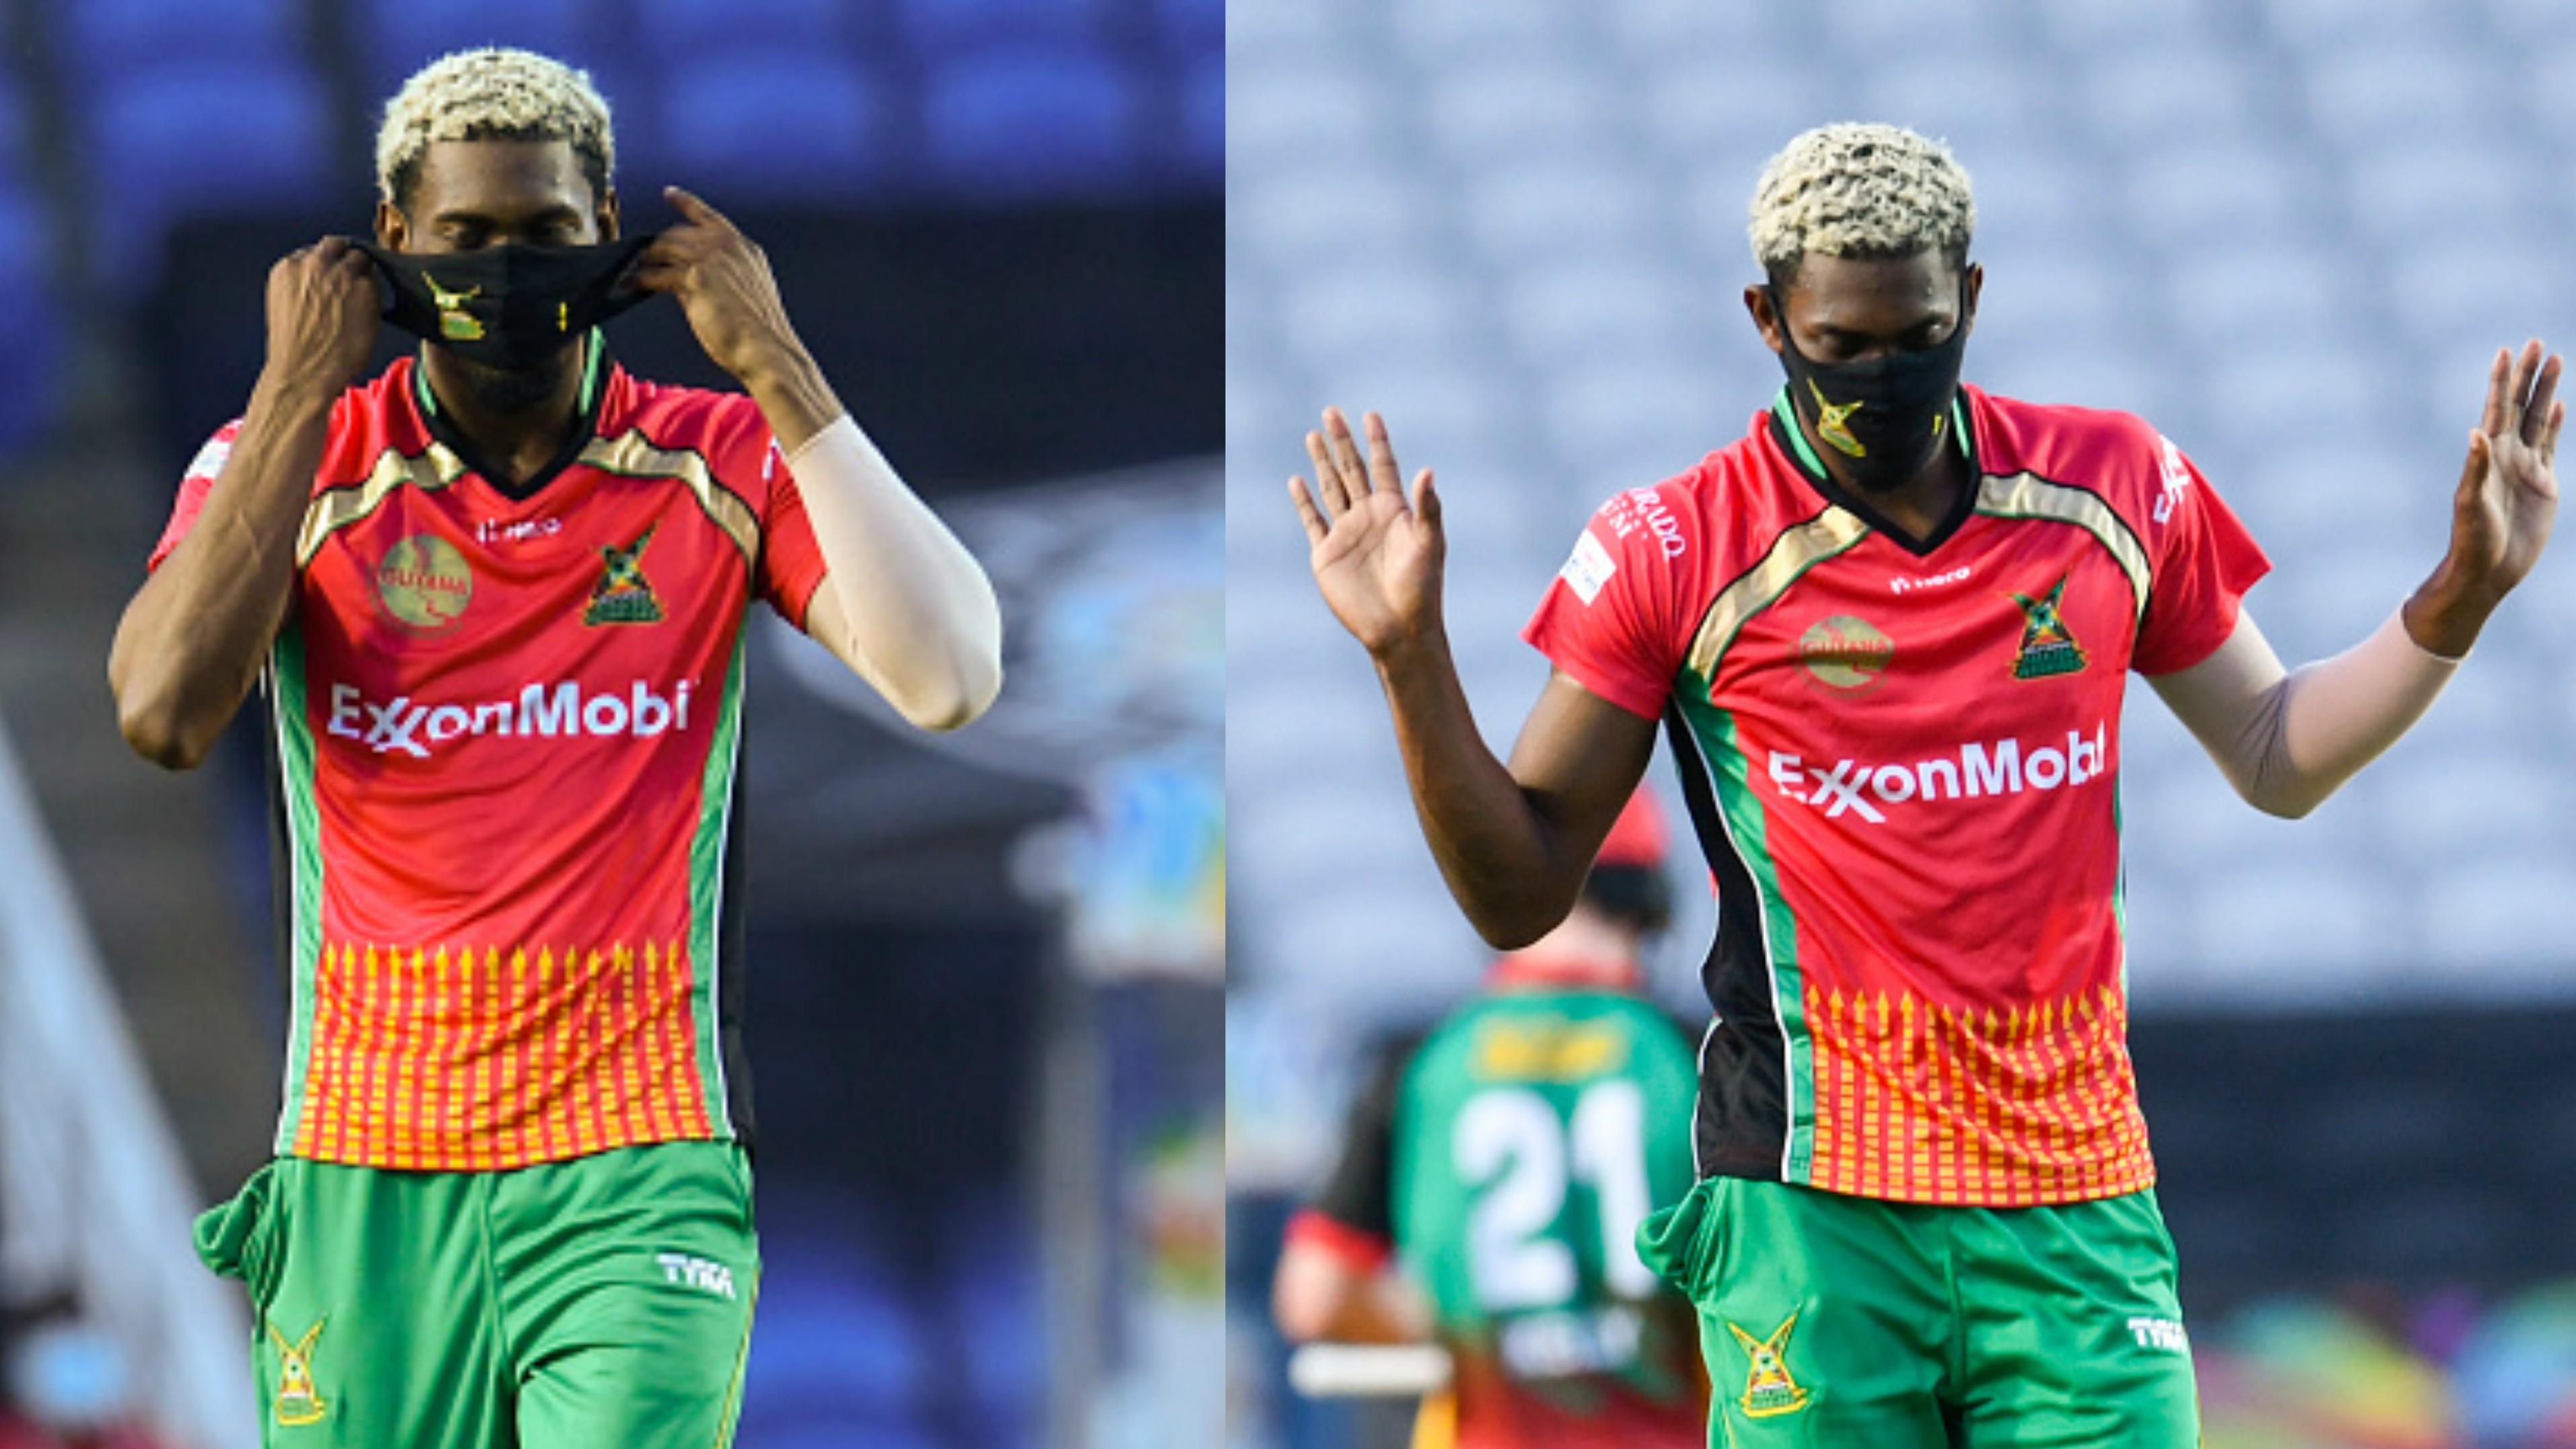 CPL 2020: WATCH - Keemo Paul's amazing ‘mask on’ celebration in the CPL